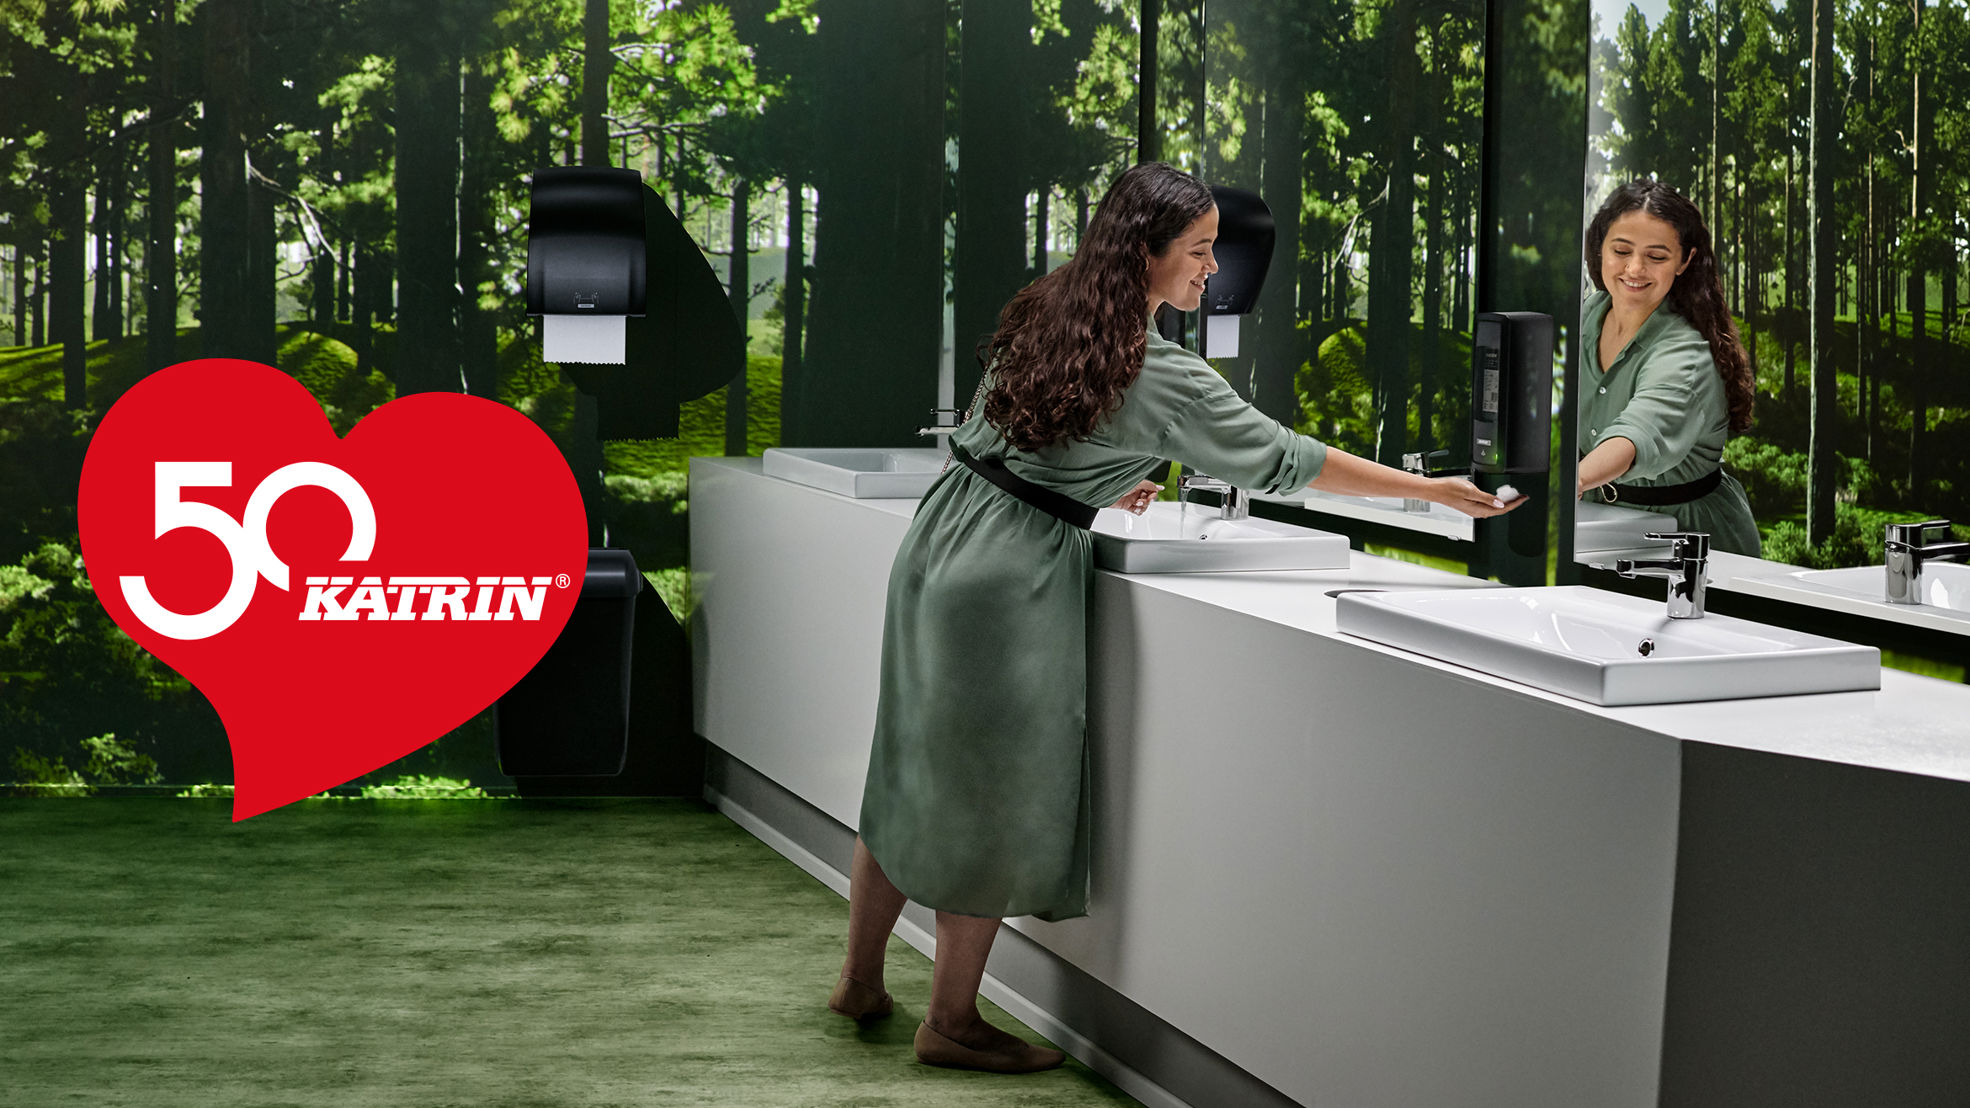 Katrin offers smart and functional hygiene solutions for public washrooms and workplaces